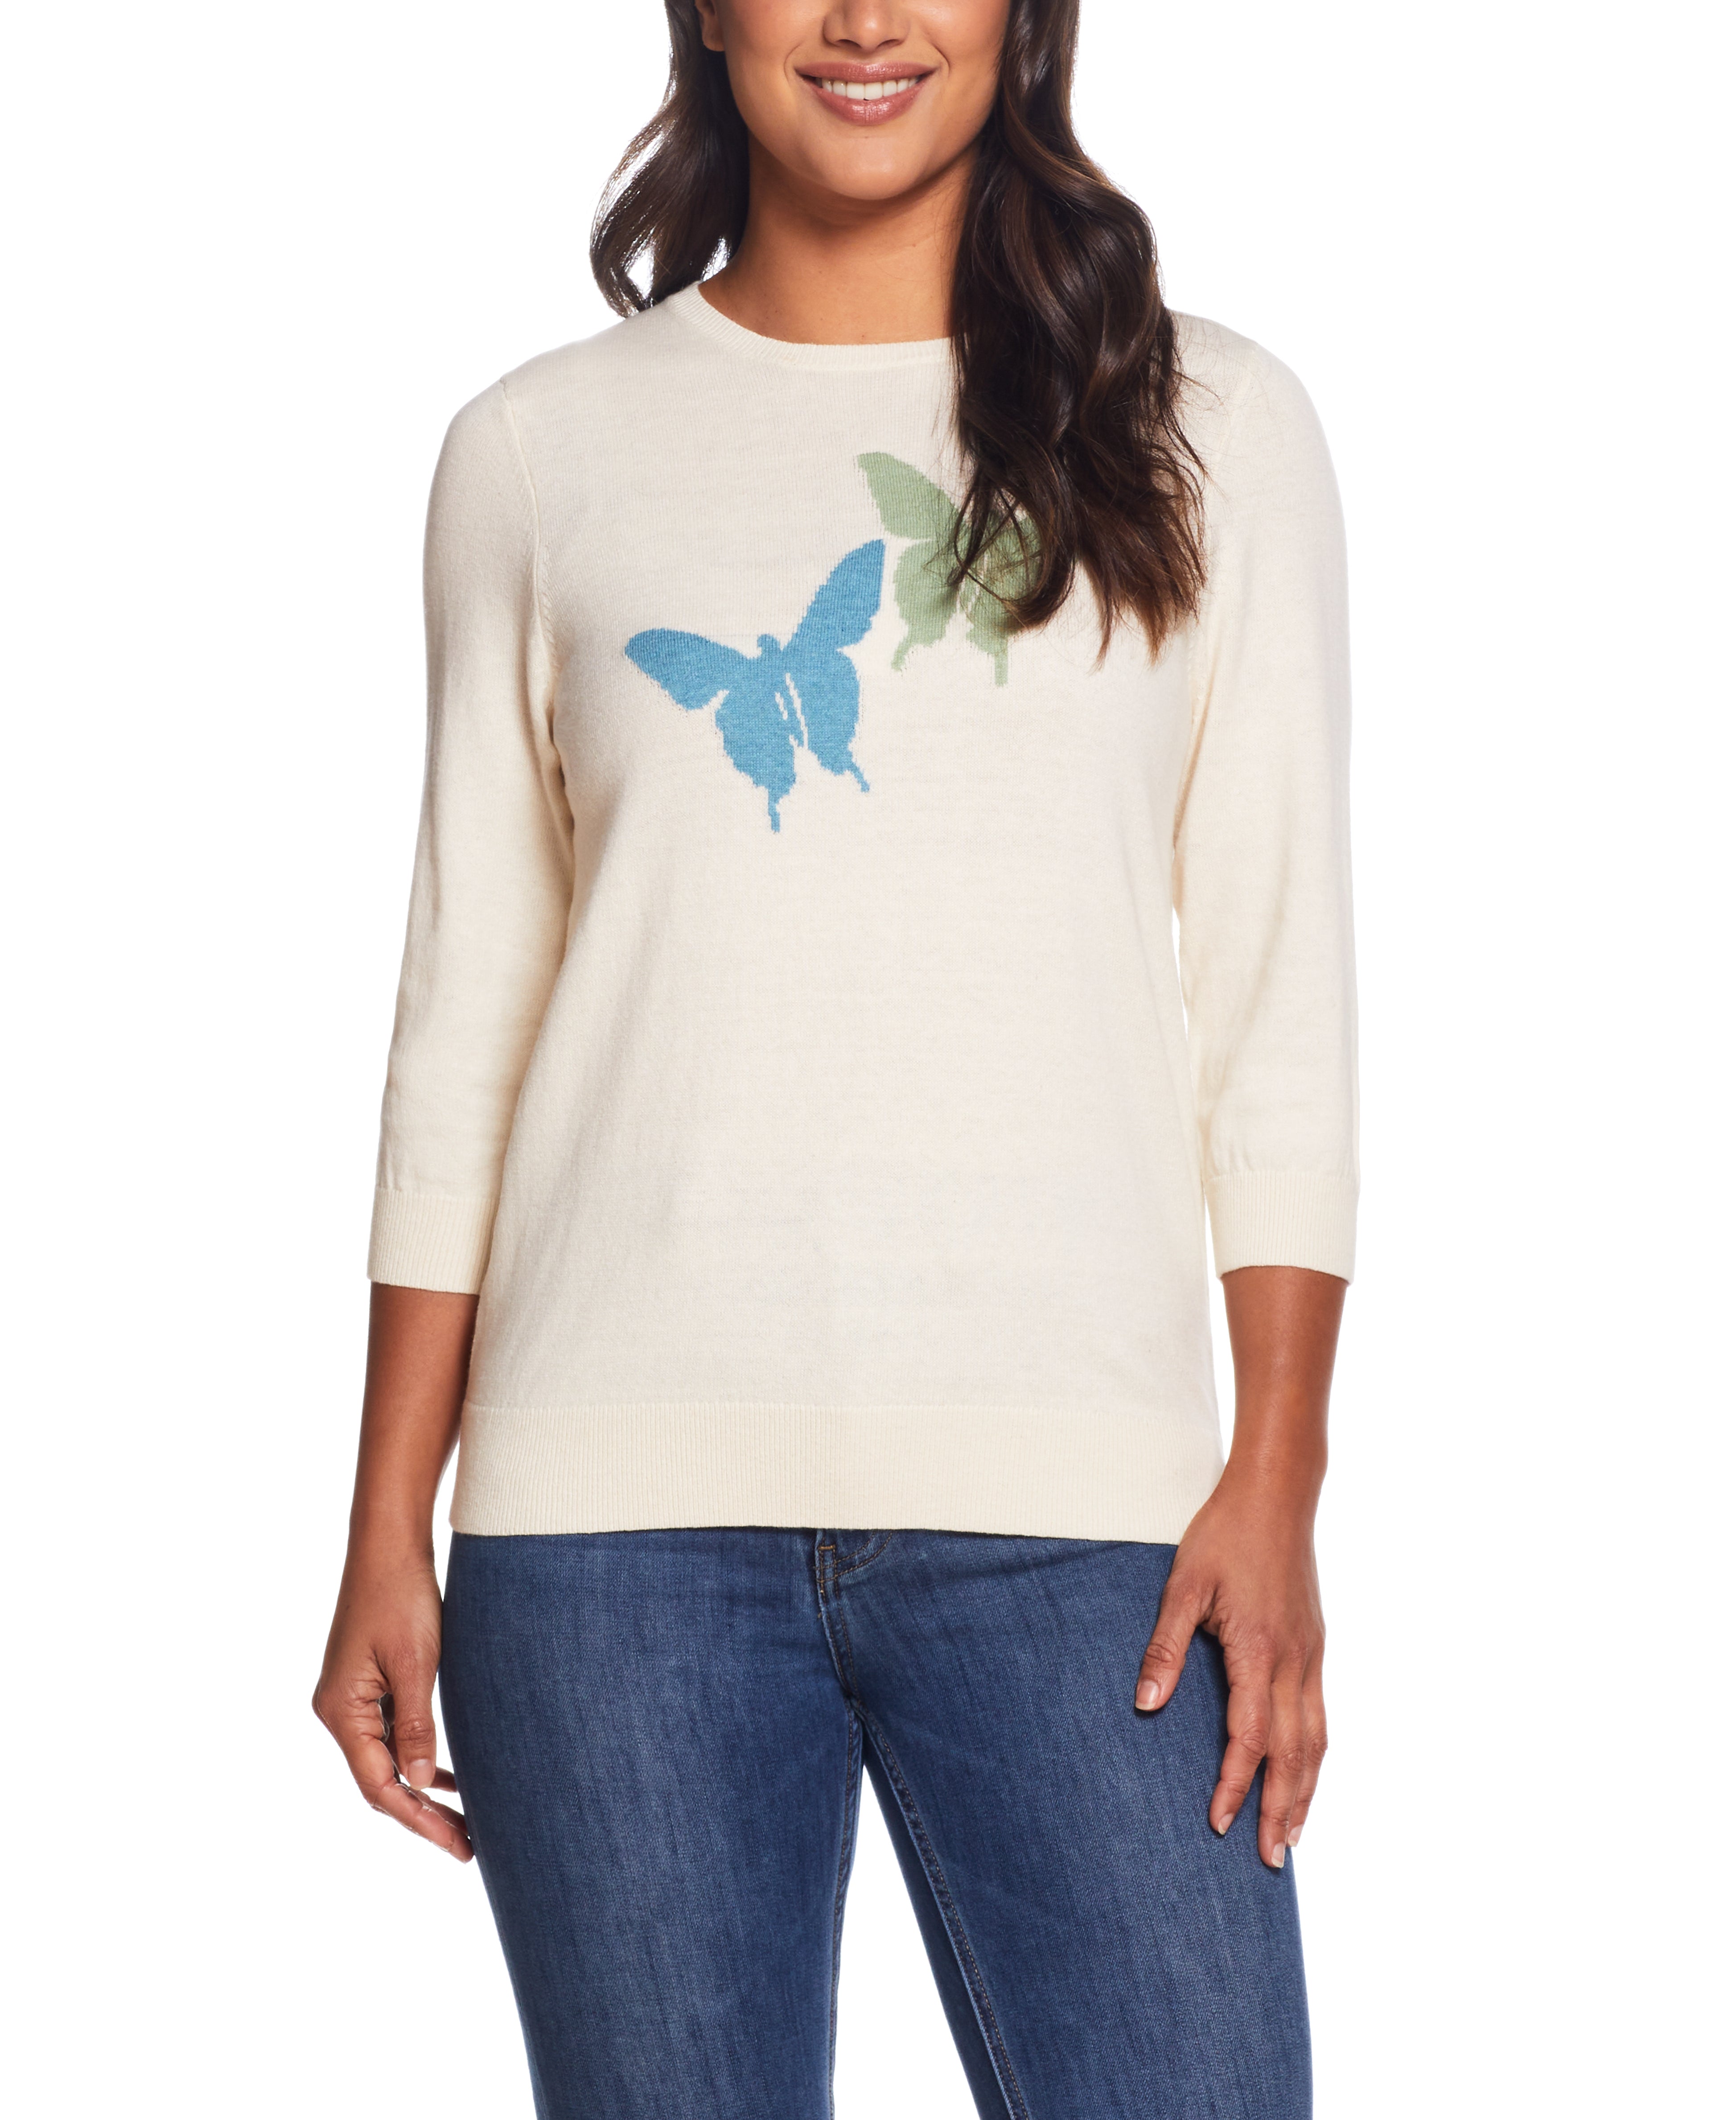 BUTTERFLY COTTON CASHMERE SWEATER in IVORY